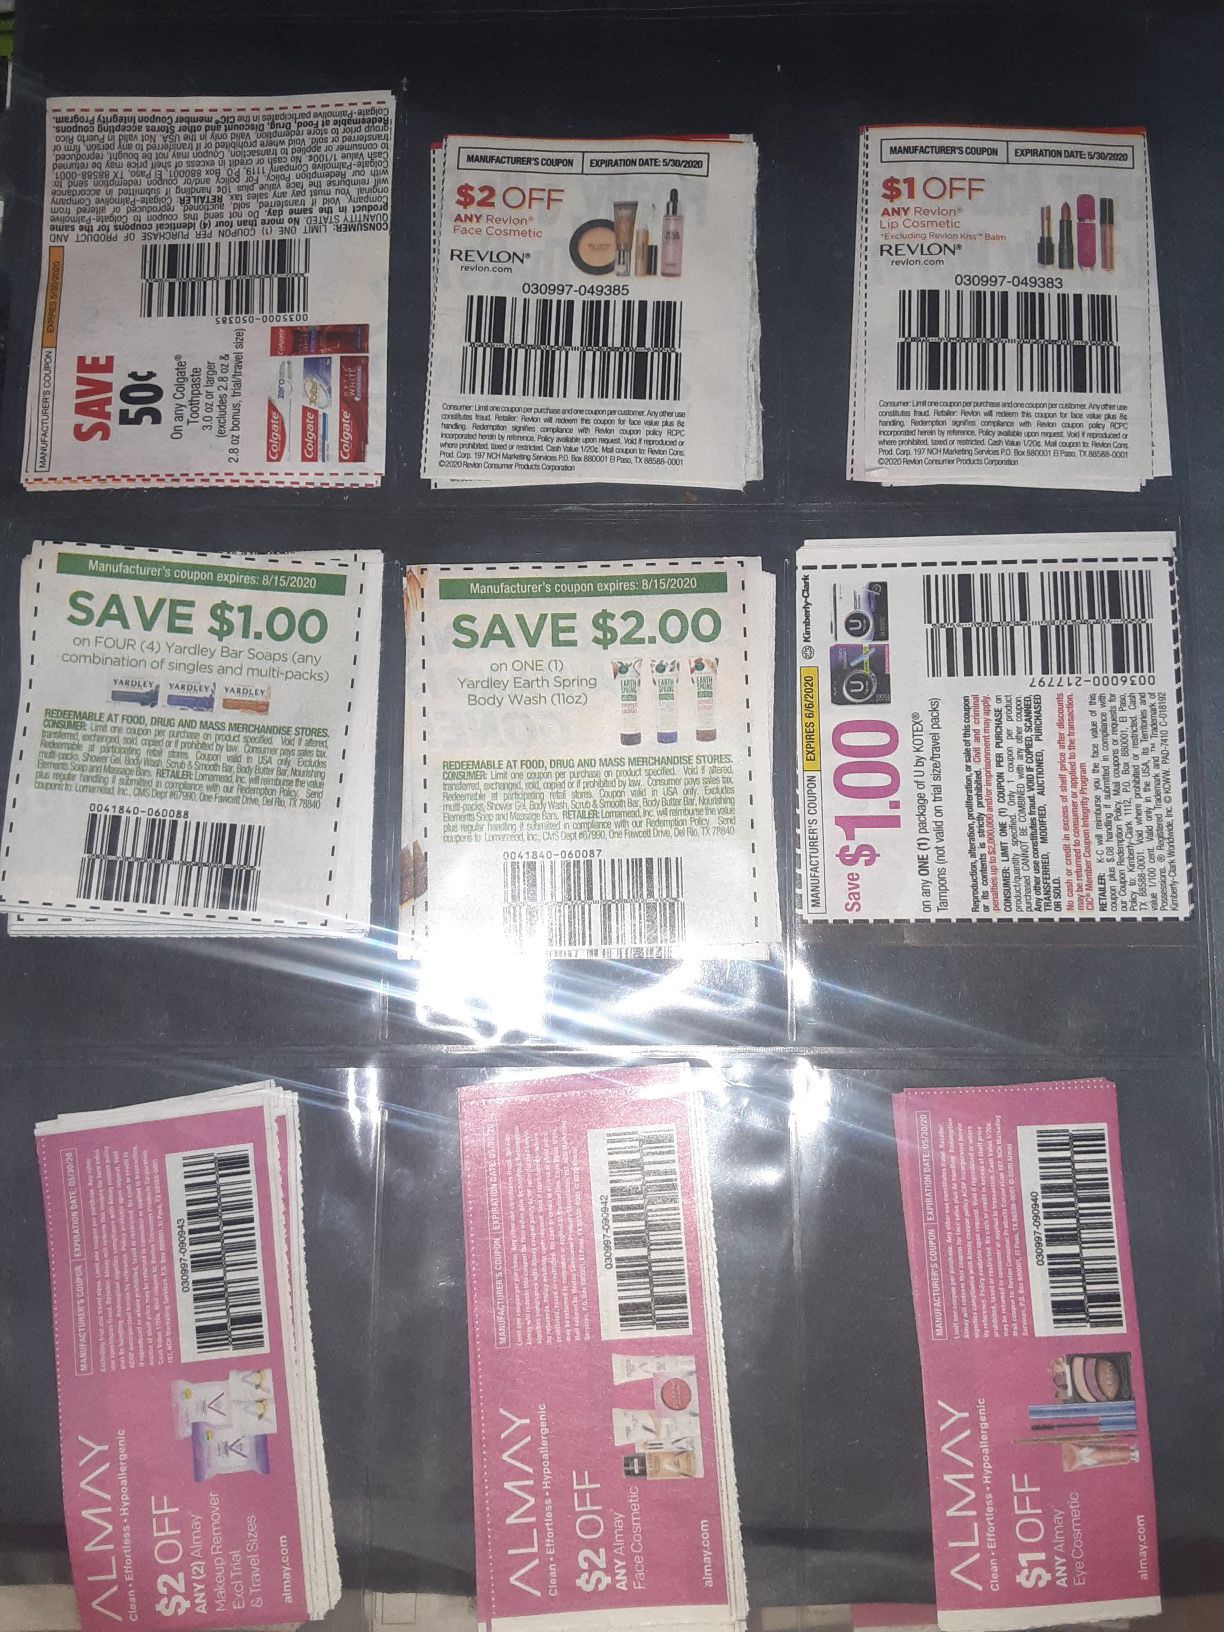 Clipped coupons clip coupon